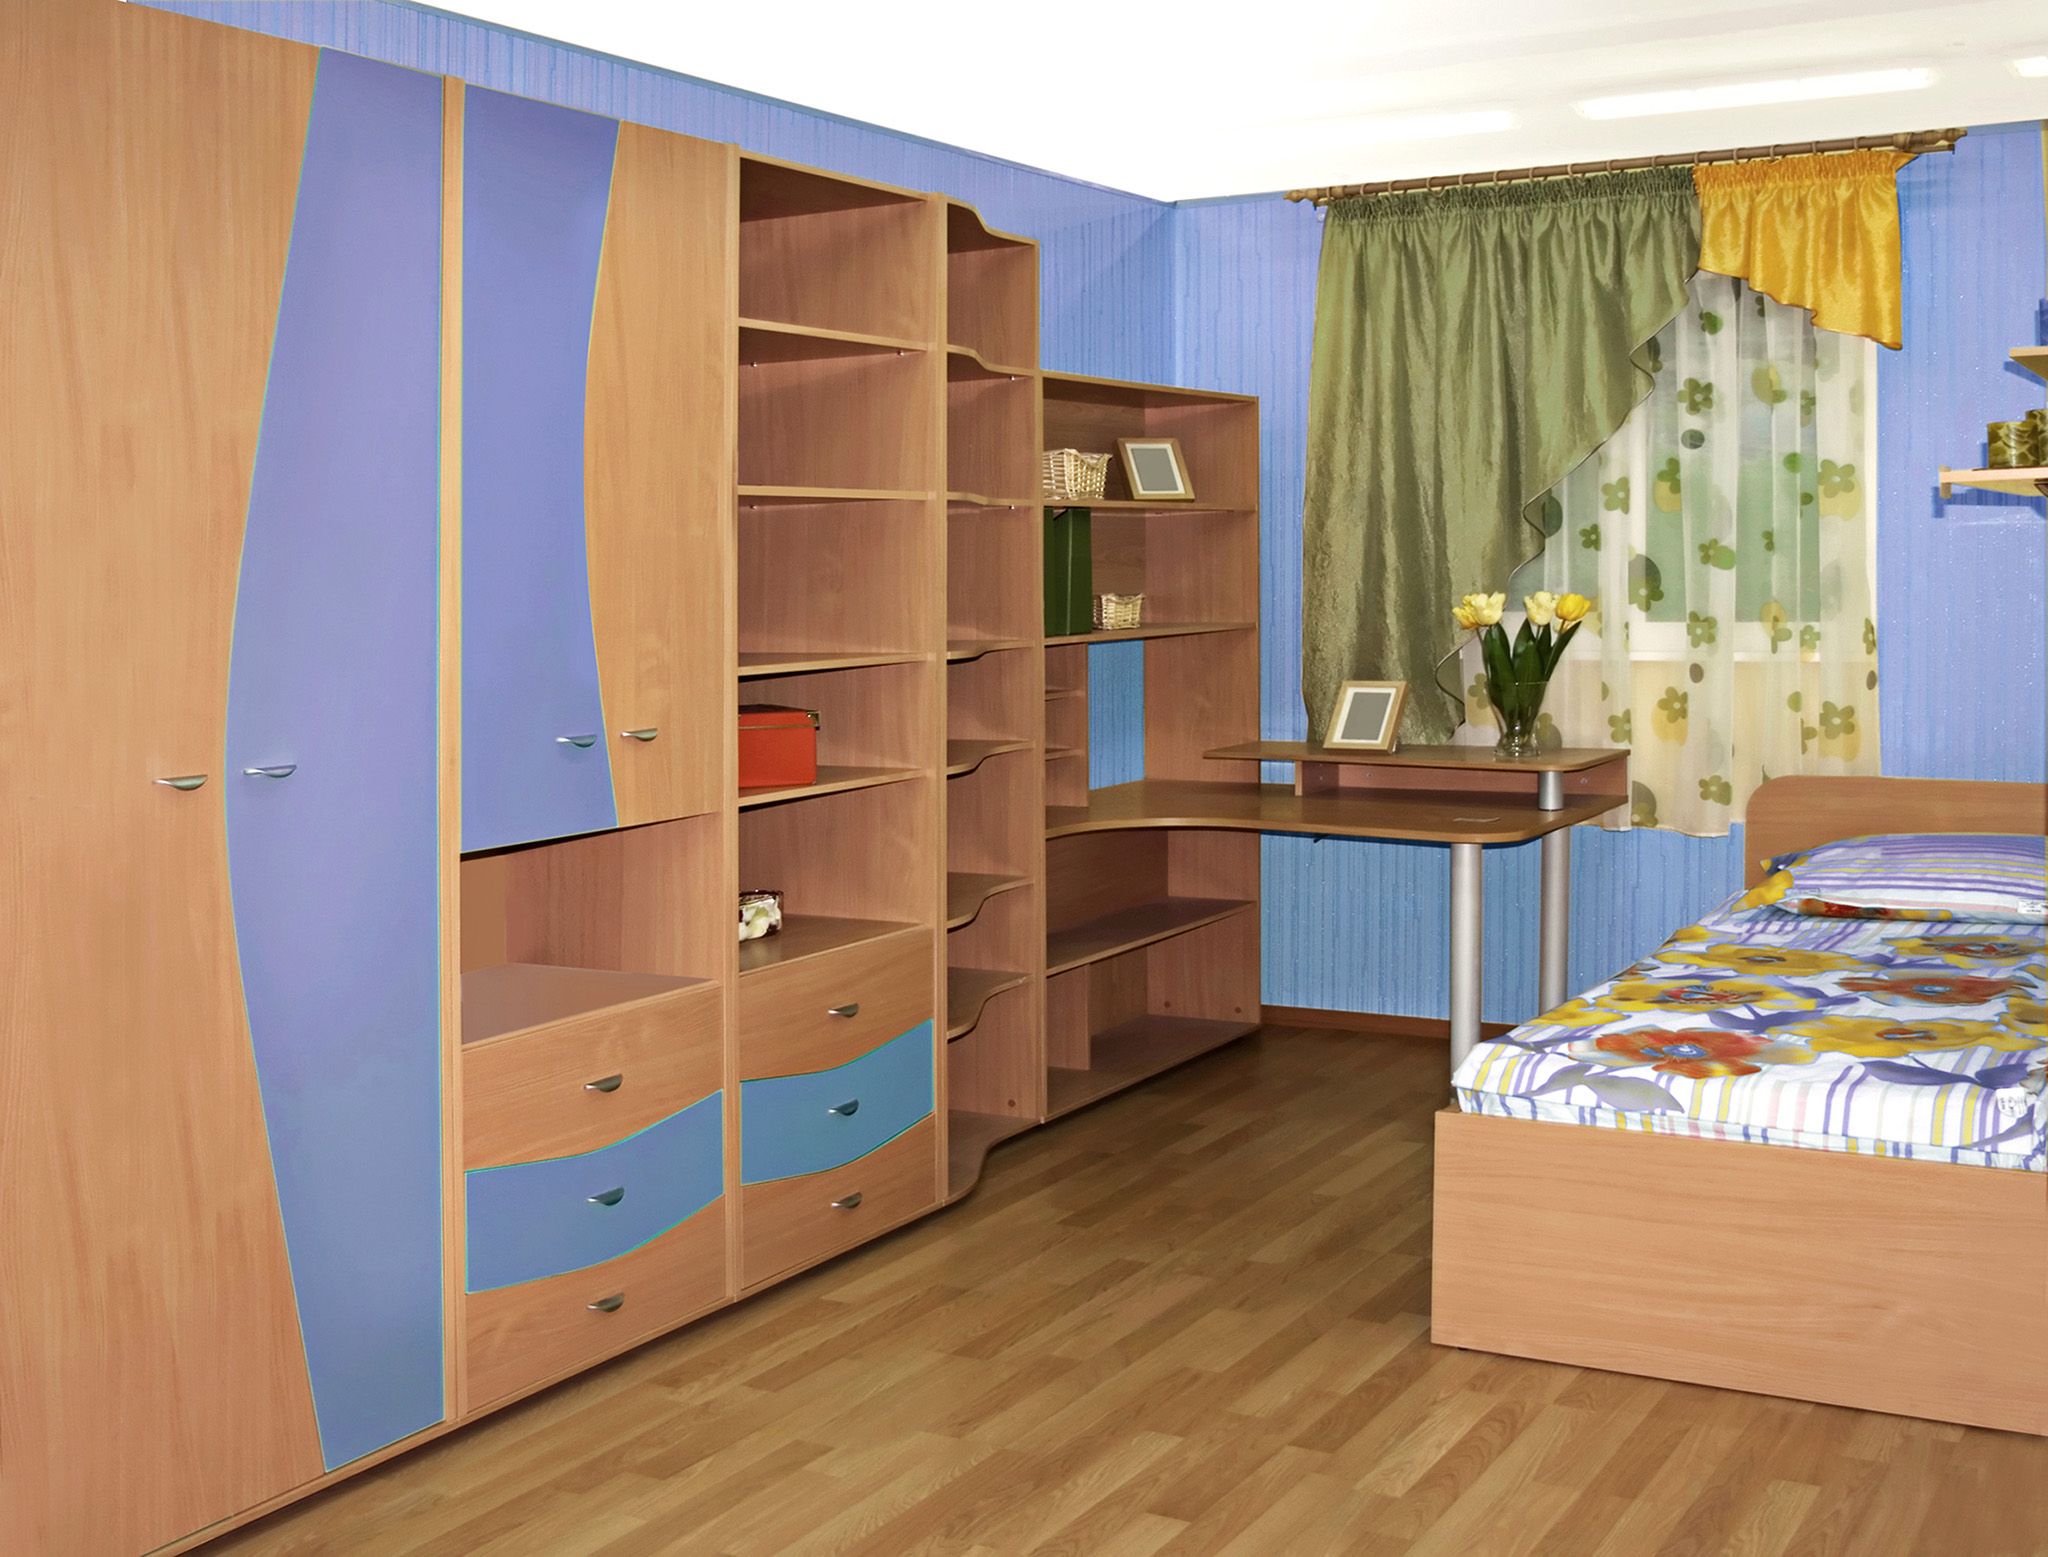 Fitted Wardrobes Ideas | Children's Bedroom Ideas Within Childrens Wardrobes With Drawers And Shelves (View 16 of 20)